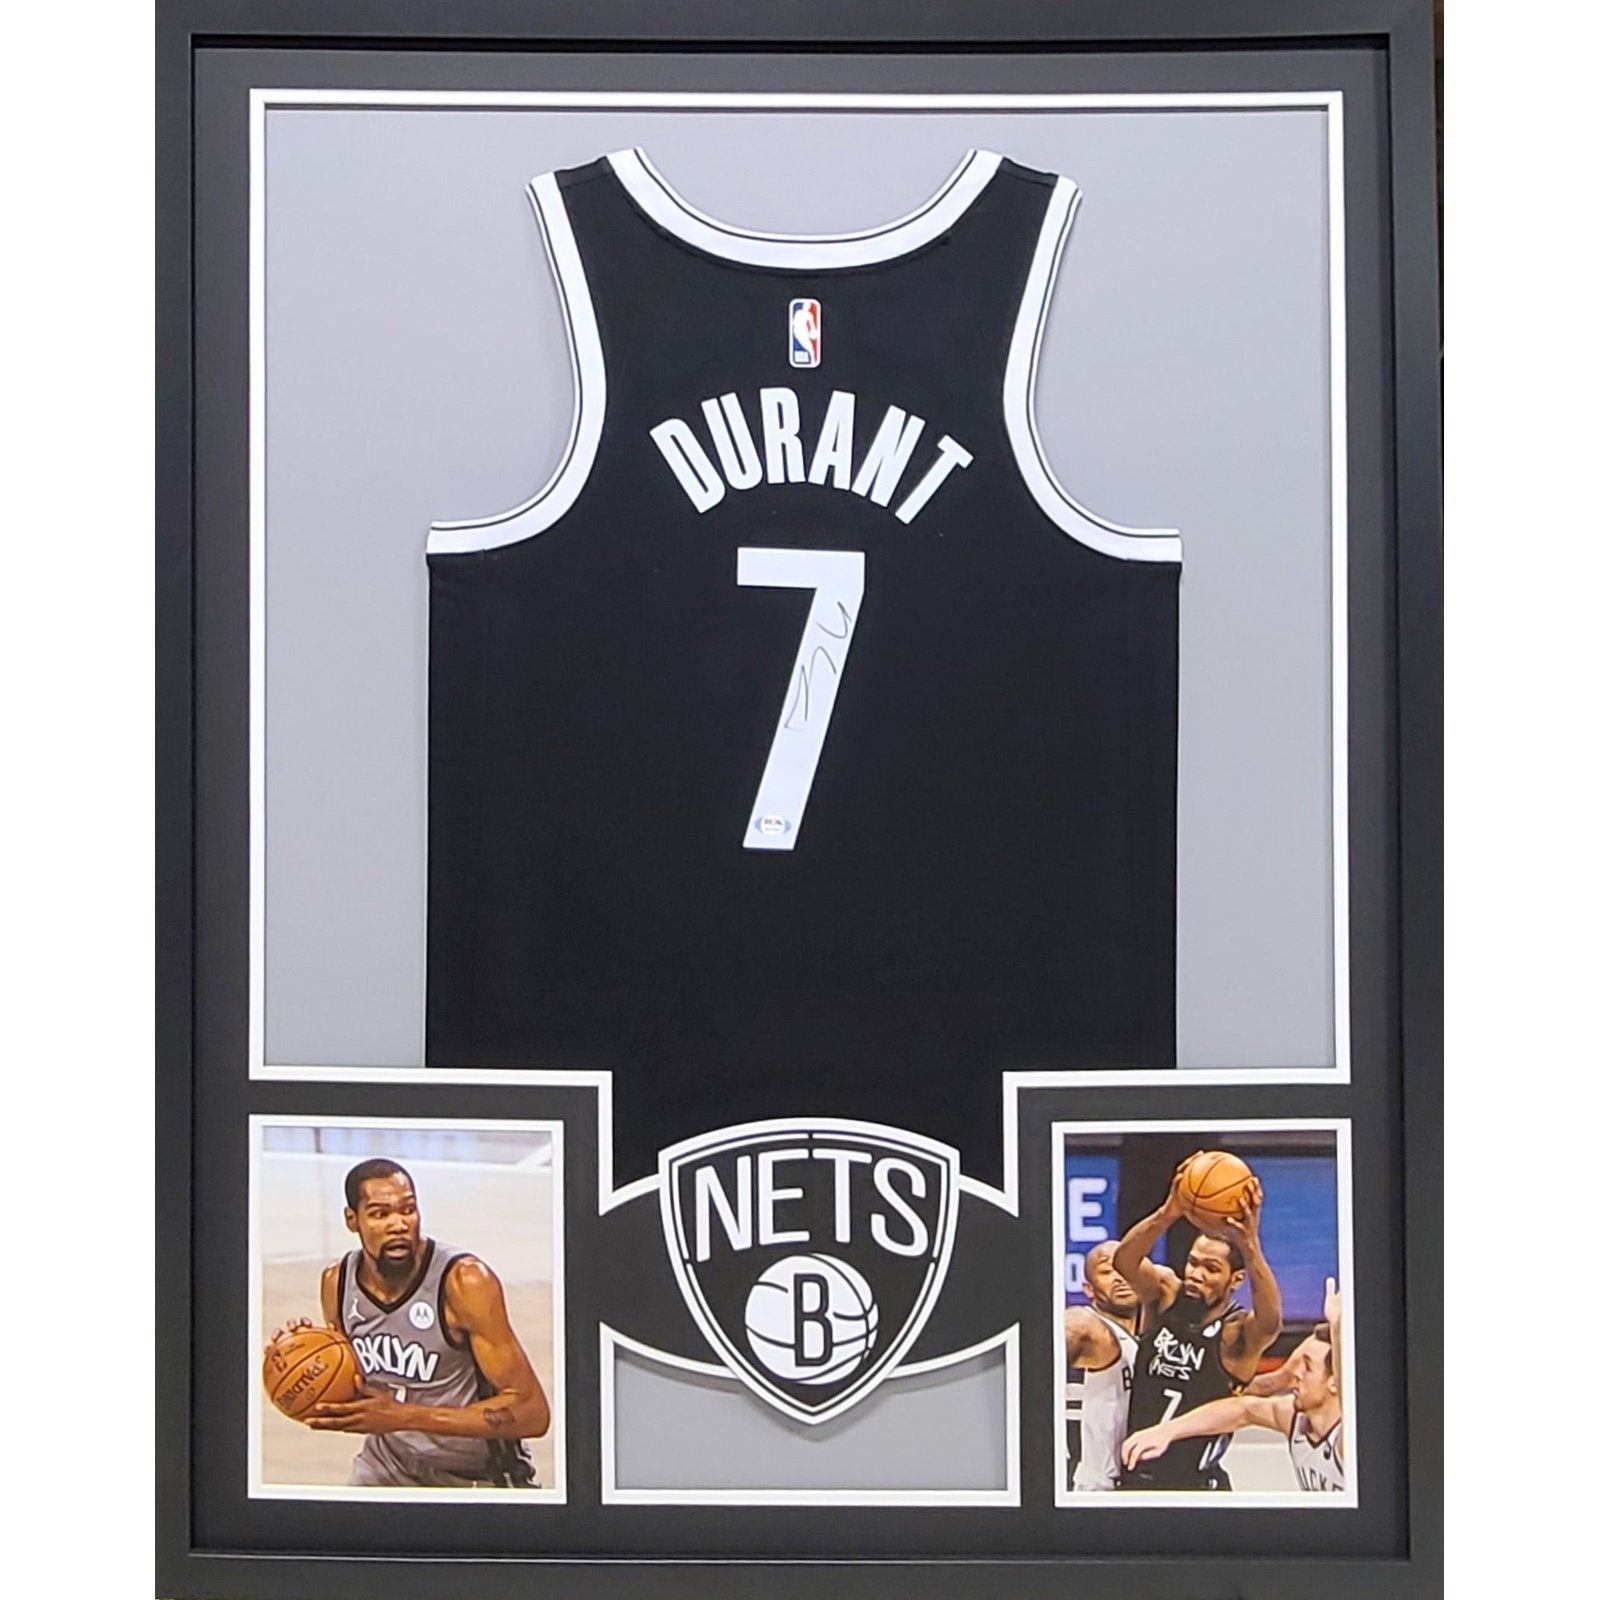 Kevin Durant Autographed Brooklyn Custom White Basketball Jersey - BAS